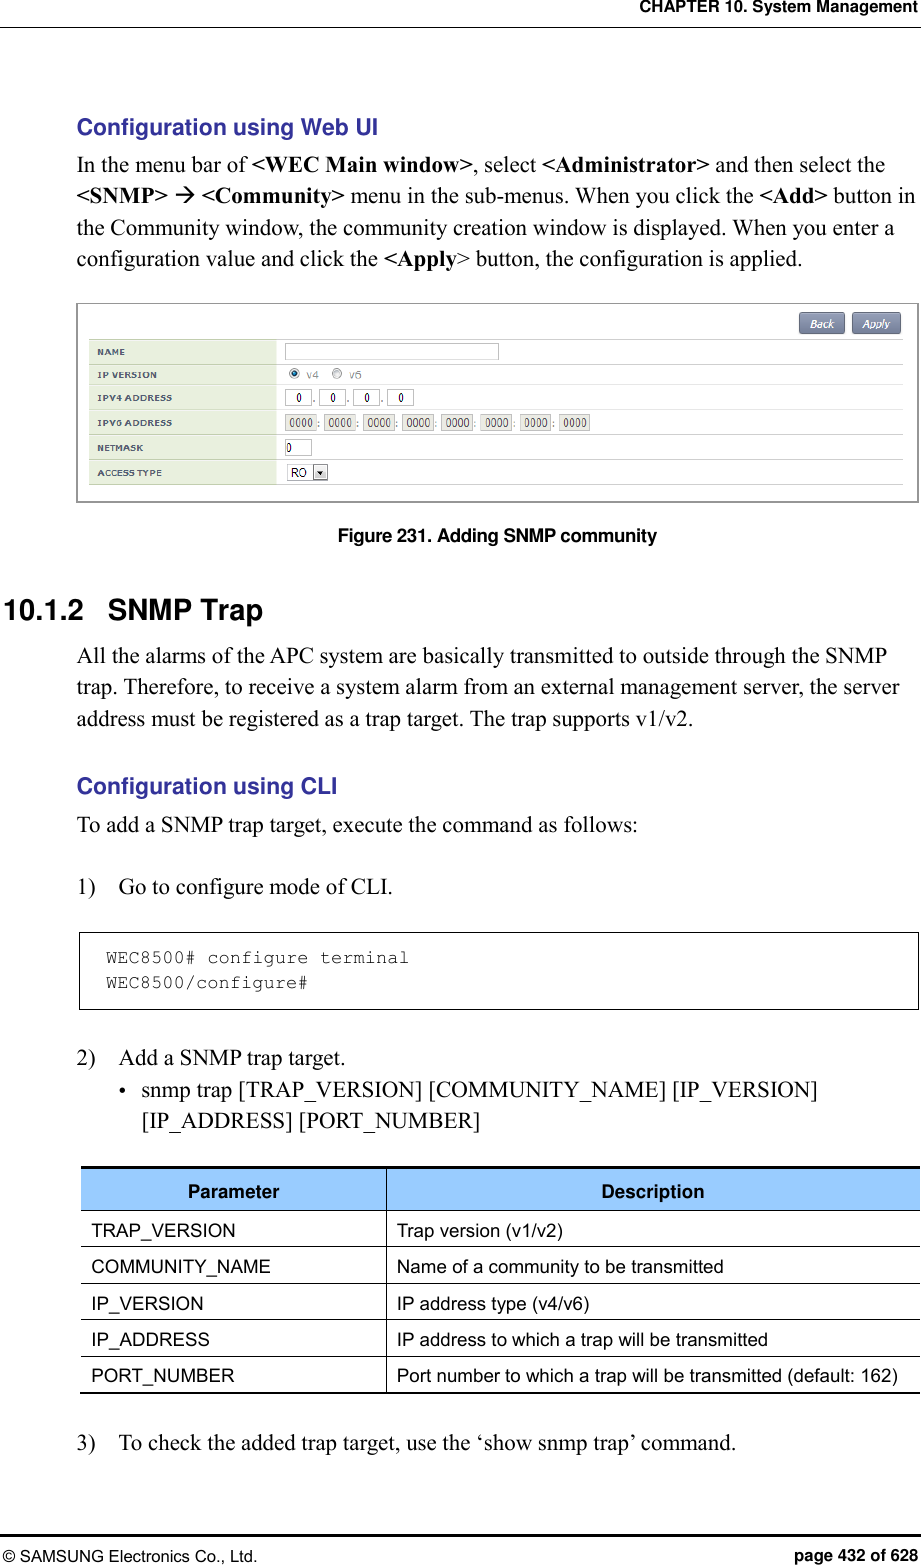 CHAPTER 10. System Management © SAMSUNG Electronics Co., Ltd.  page 432 of 628 Configuration using Web UI In the menu bar of &lt;WEC Main window&gt;, select &lt;Administrator&gt; and then select the &lt;SNMP&gt;  &lt;Community&gt; menu in the sub-menus. When you click the &lt;Add&gt; button in the Community window, the community creation window is displayed. When you enter a configuration value and click the &lt;Apply&gt; button, the configuration is applied.  Figure 231. Adding SNMP community  10.1.2  SNMP Trap All the alarms of the APC system are basically transmitted to outside through the SNMP trap. Therefore, to receive a system alarm from an external management server, the server address must be registered as a trap target. The trap supports v1/v2.  Configuration using CLI To add a SNMP trap target, execute the command as follows:  1)    Go to configure mode of CLI.  WEC8500# configure terminal WEC8500/configure#  2)    Add a SNMP trap target.  snmp trap [TRAP_VERSION] [COMMUNITY_NAME] [IP_VERSION] [IP_ADDRESS] [PORT_NUMBER]  Parameter Description TRAP_VERSION Trap version (v1/v2) COMMUNITY_NAME Name of a community to be transmitted IP_VERSION IP address type (v4/v6) IP_ADDRESS IP address to which a trap will be transmitted PORT_NUMBER Port number to which a trap will be transmitted (default: 162)  3)    To check the added trap target, use the ‘show snmp trap’ command.  